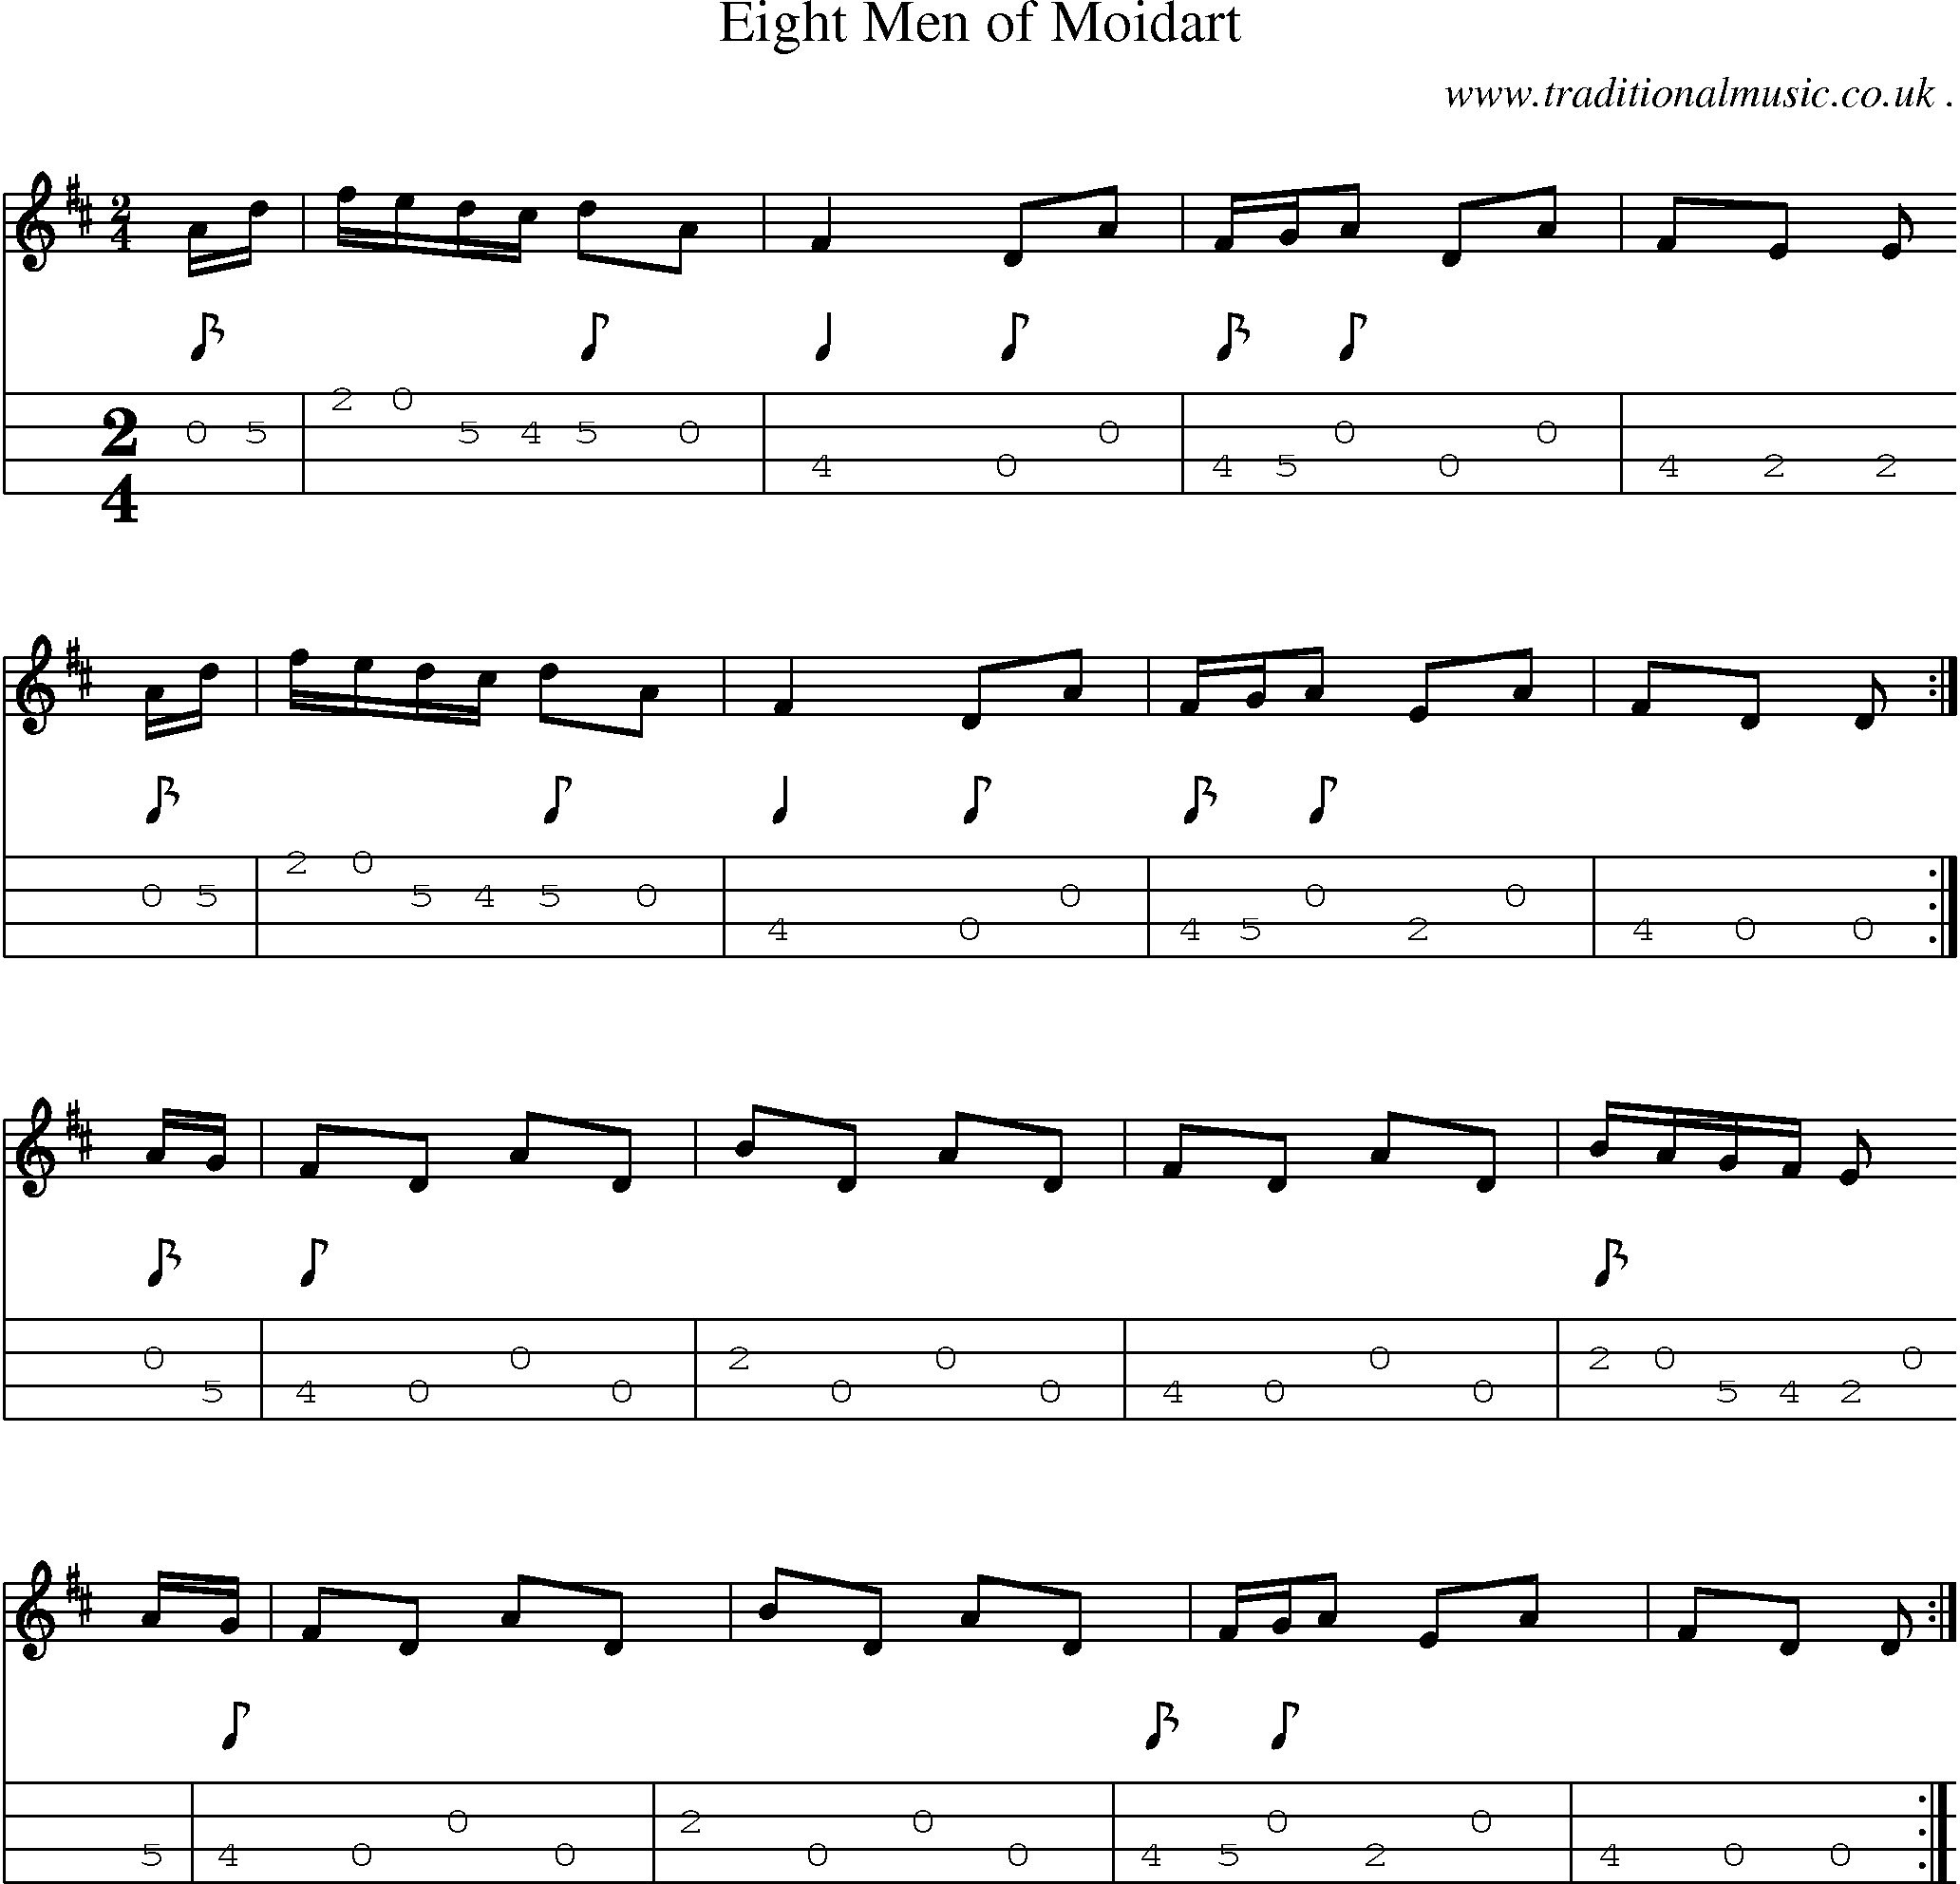 Sheet-music  score, Chords and Mandolin Tabs for Eight Men Of Moidart